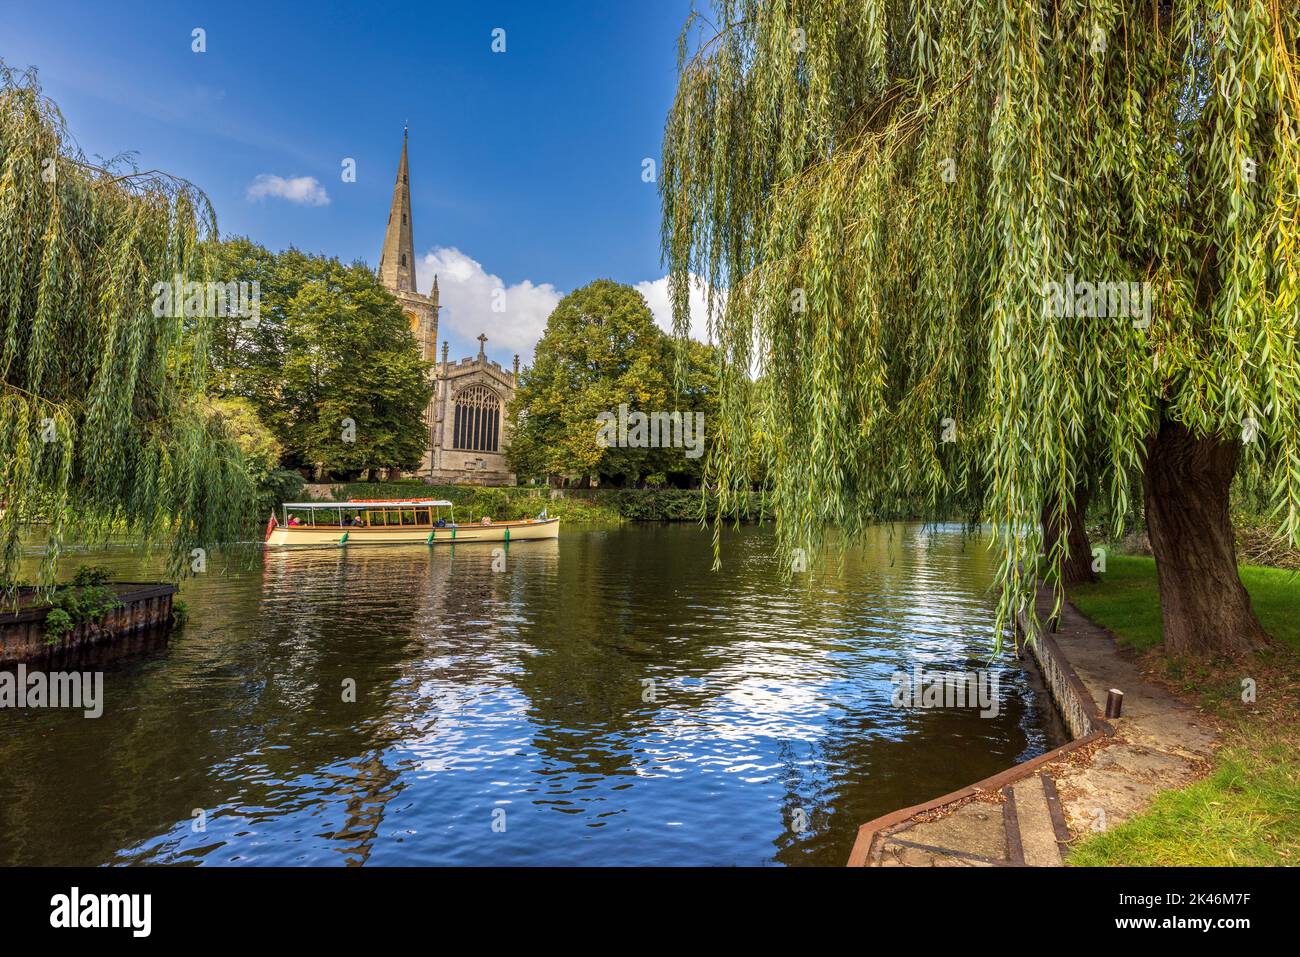 A River Cruise boat and Holy Trinity church across the river at Stratford Upon Avon, Warwickshire, England Stock Photo